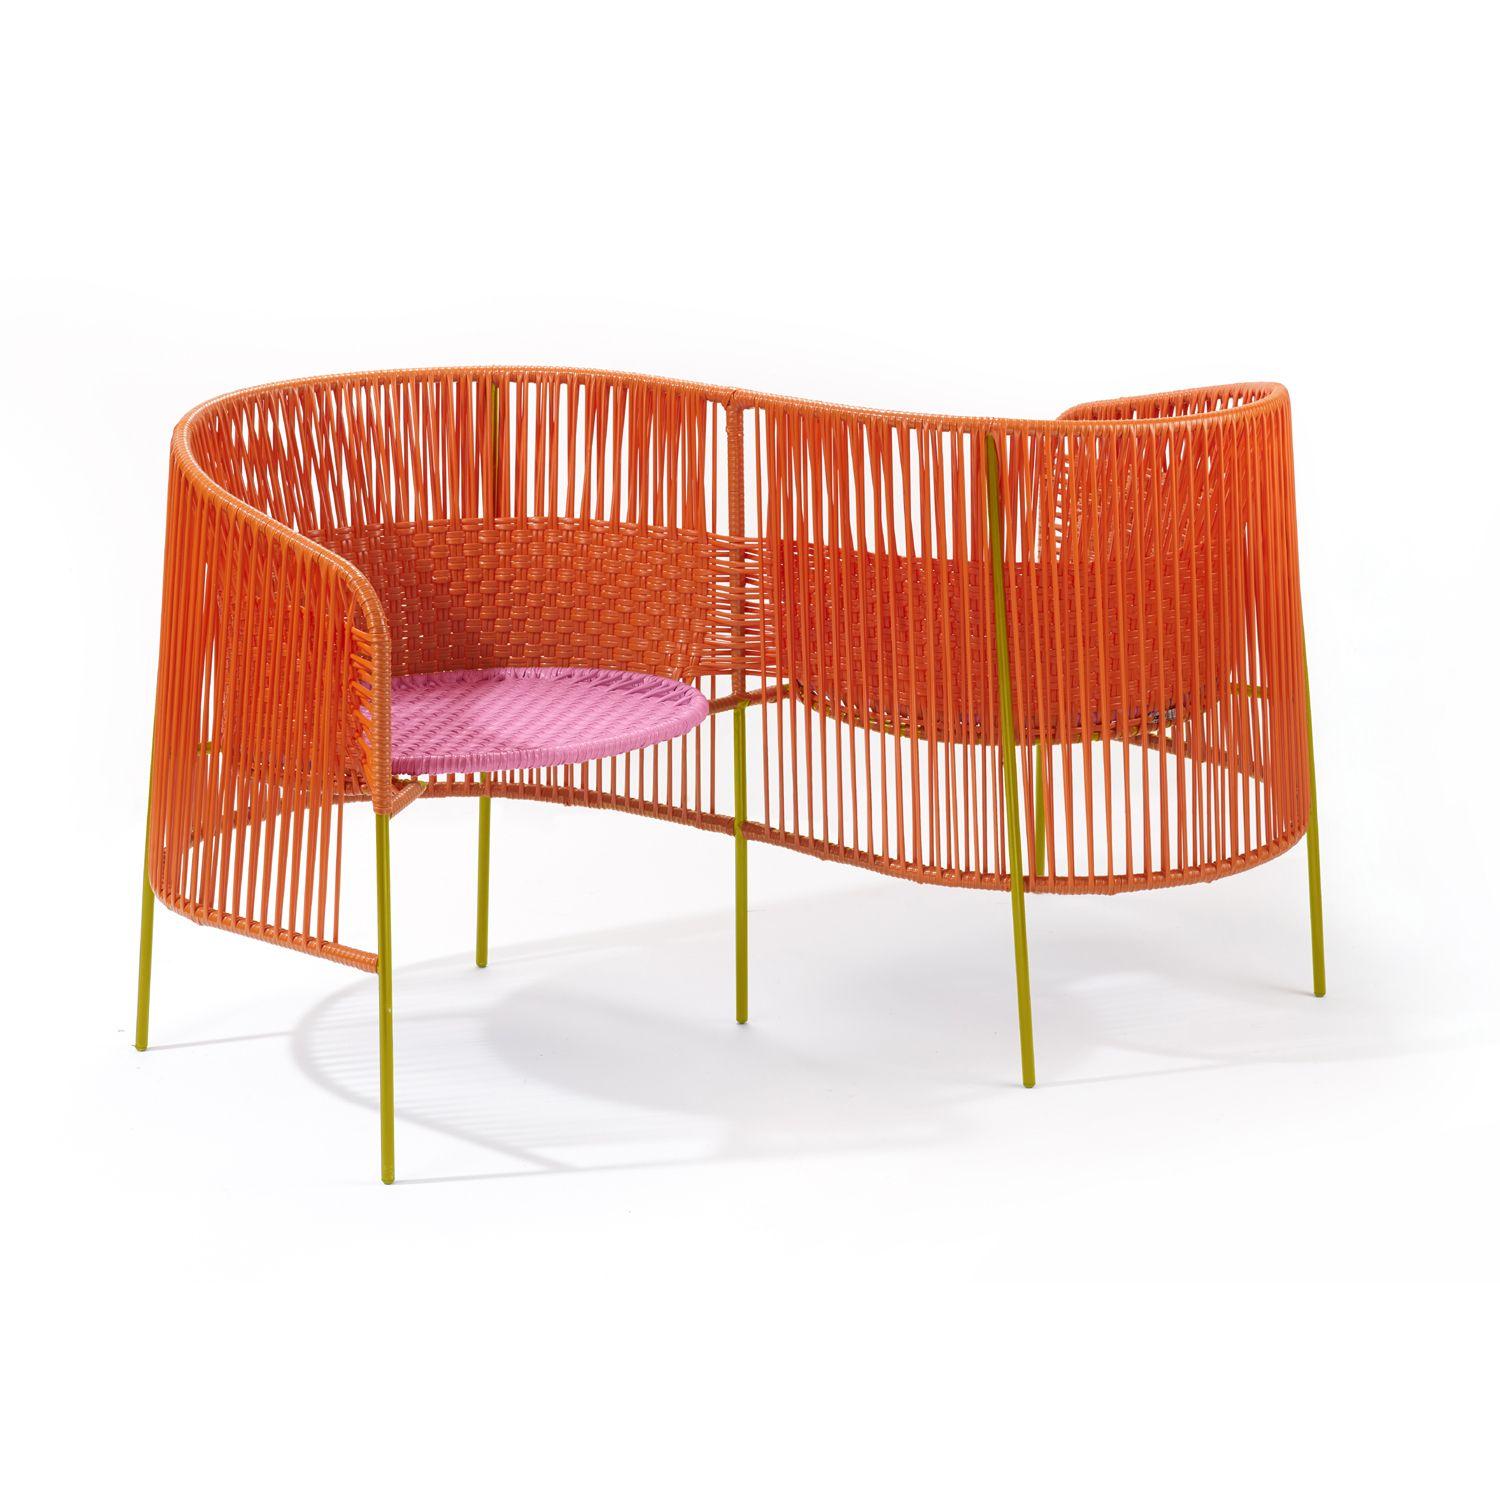 Orange Caribe Vis a Vis by Sebastian Herkner
Materials: Galvanized and powder-coated tubular steel. PVC strings are made from recycled plastic.
Technique: Made from recycled plastic and weaved by local craftspeople in Colombia. 
Dimensions: W 123.3